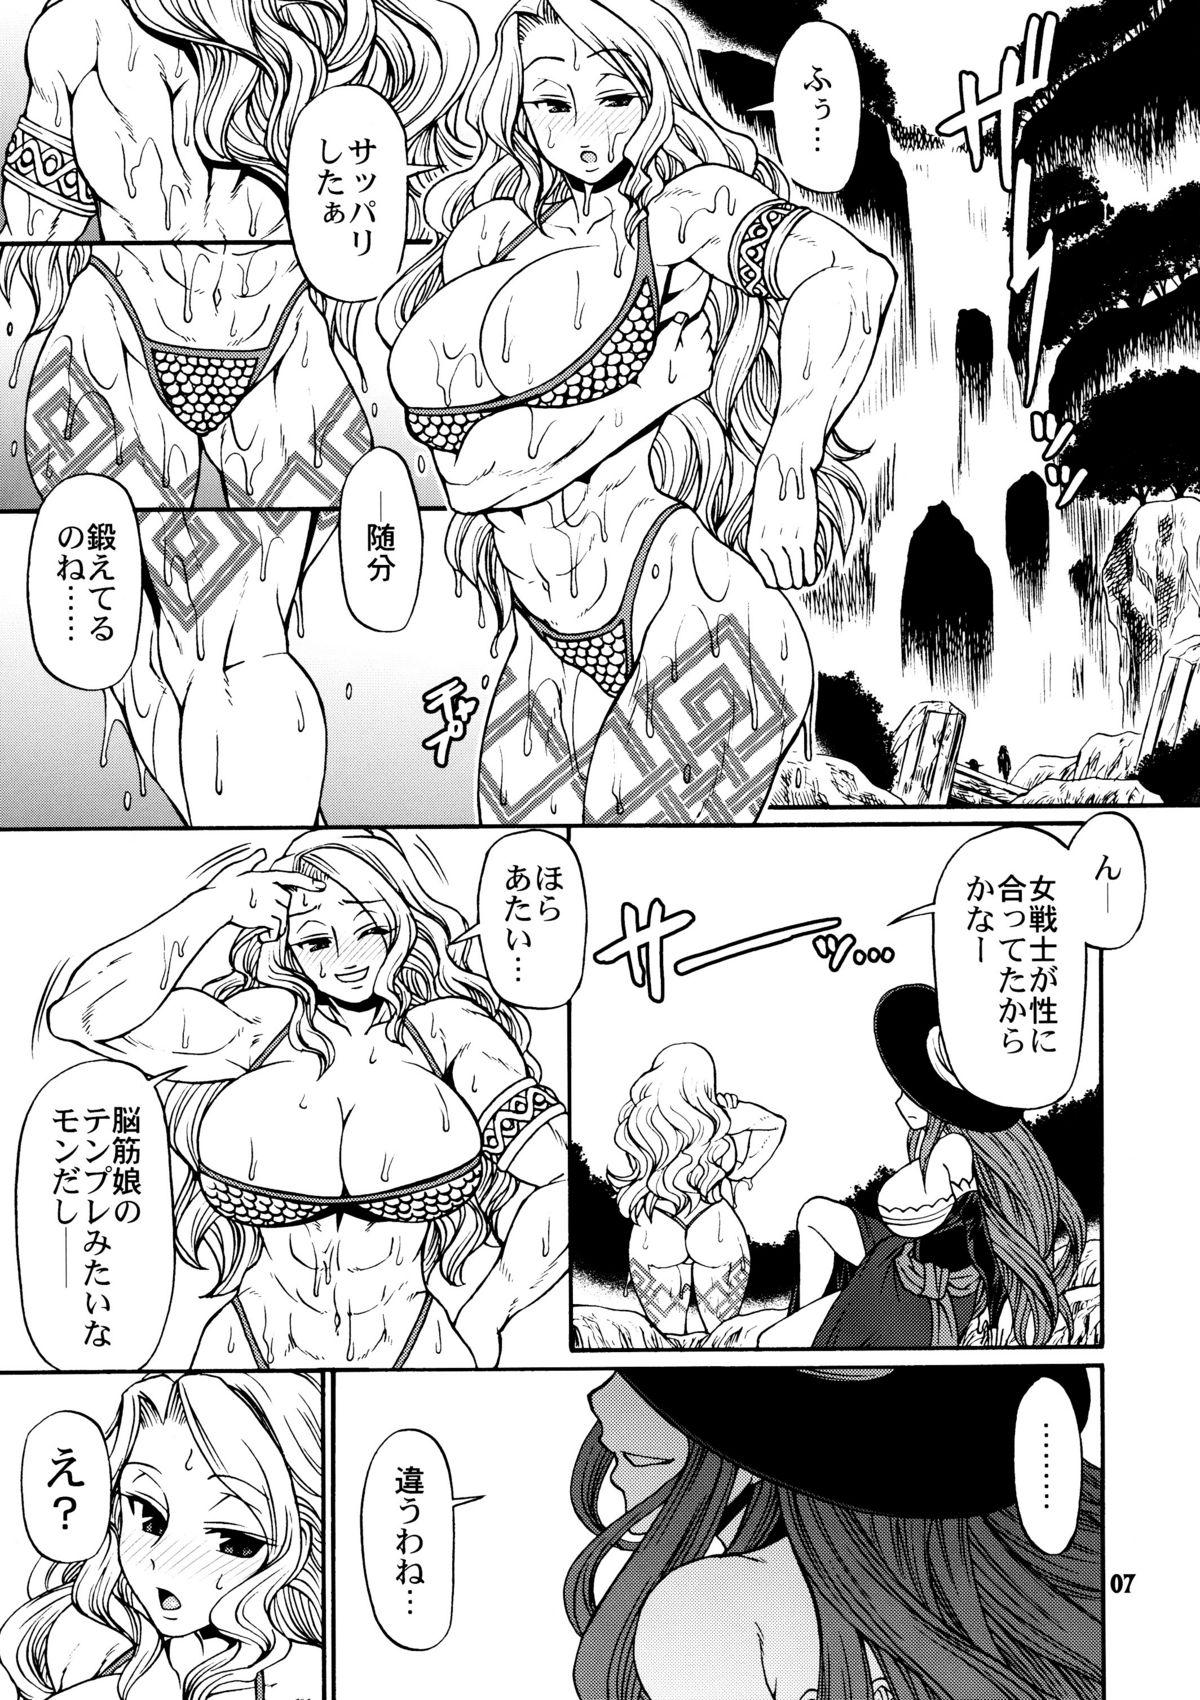 Spying PARTY HARD - Dragons crown Fucks - Page 6